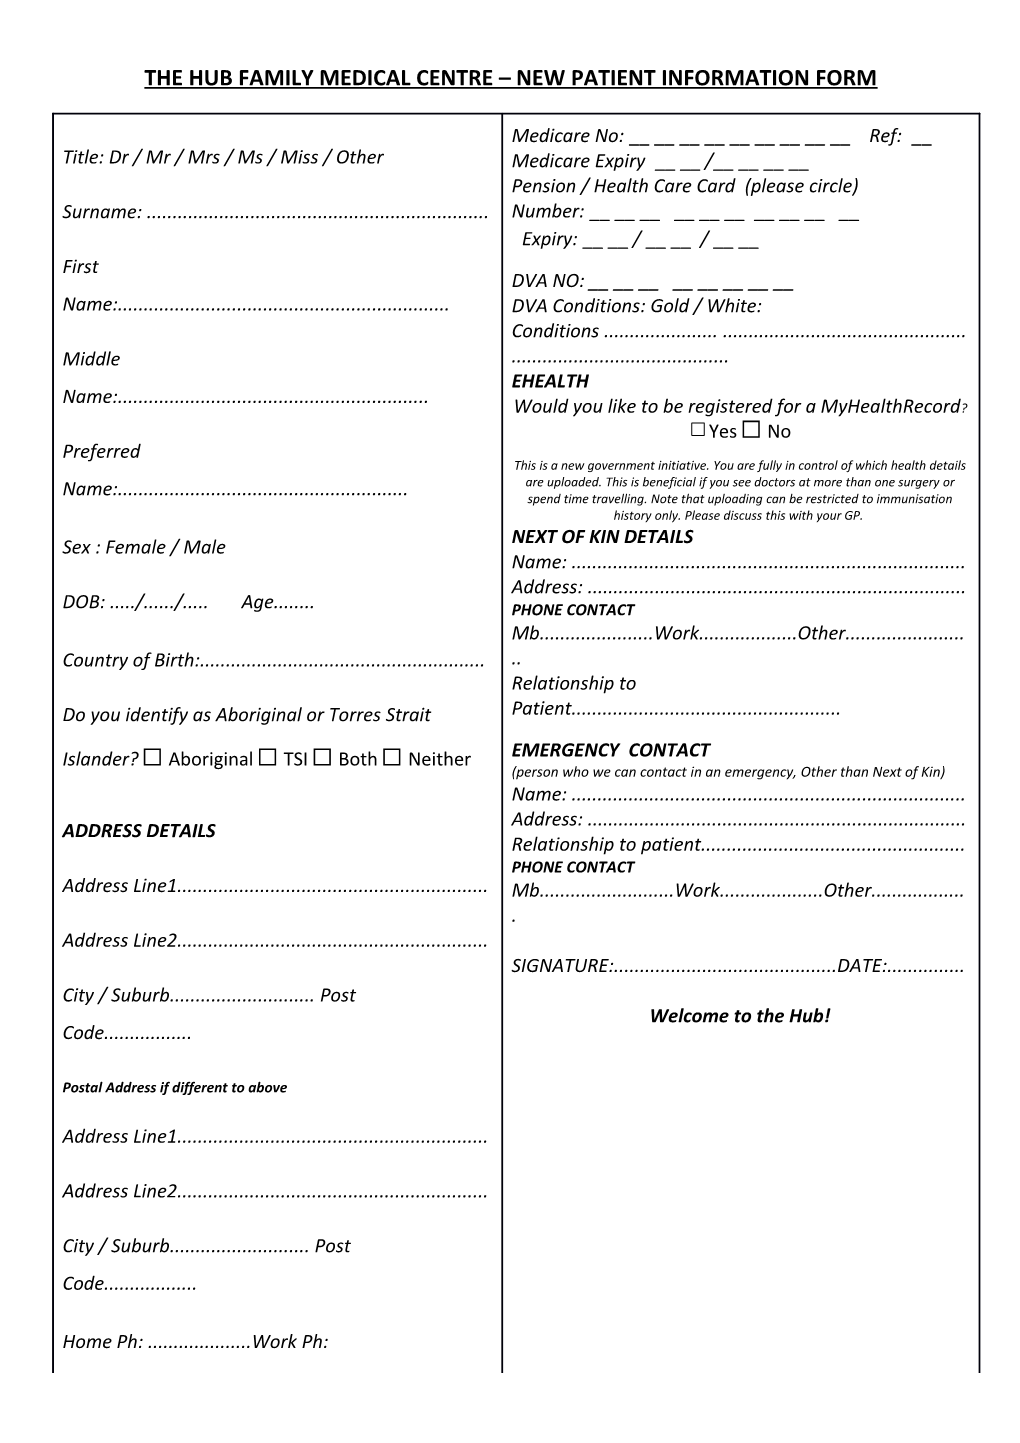 The Hub Family Medical Centre New Patient Information Form